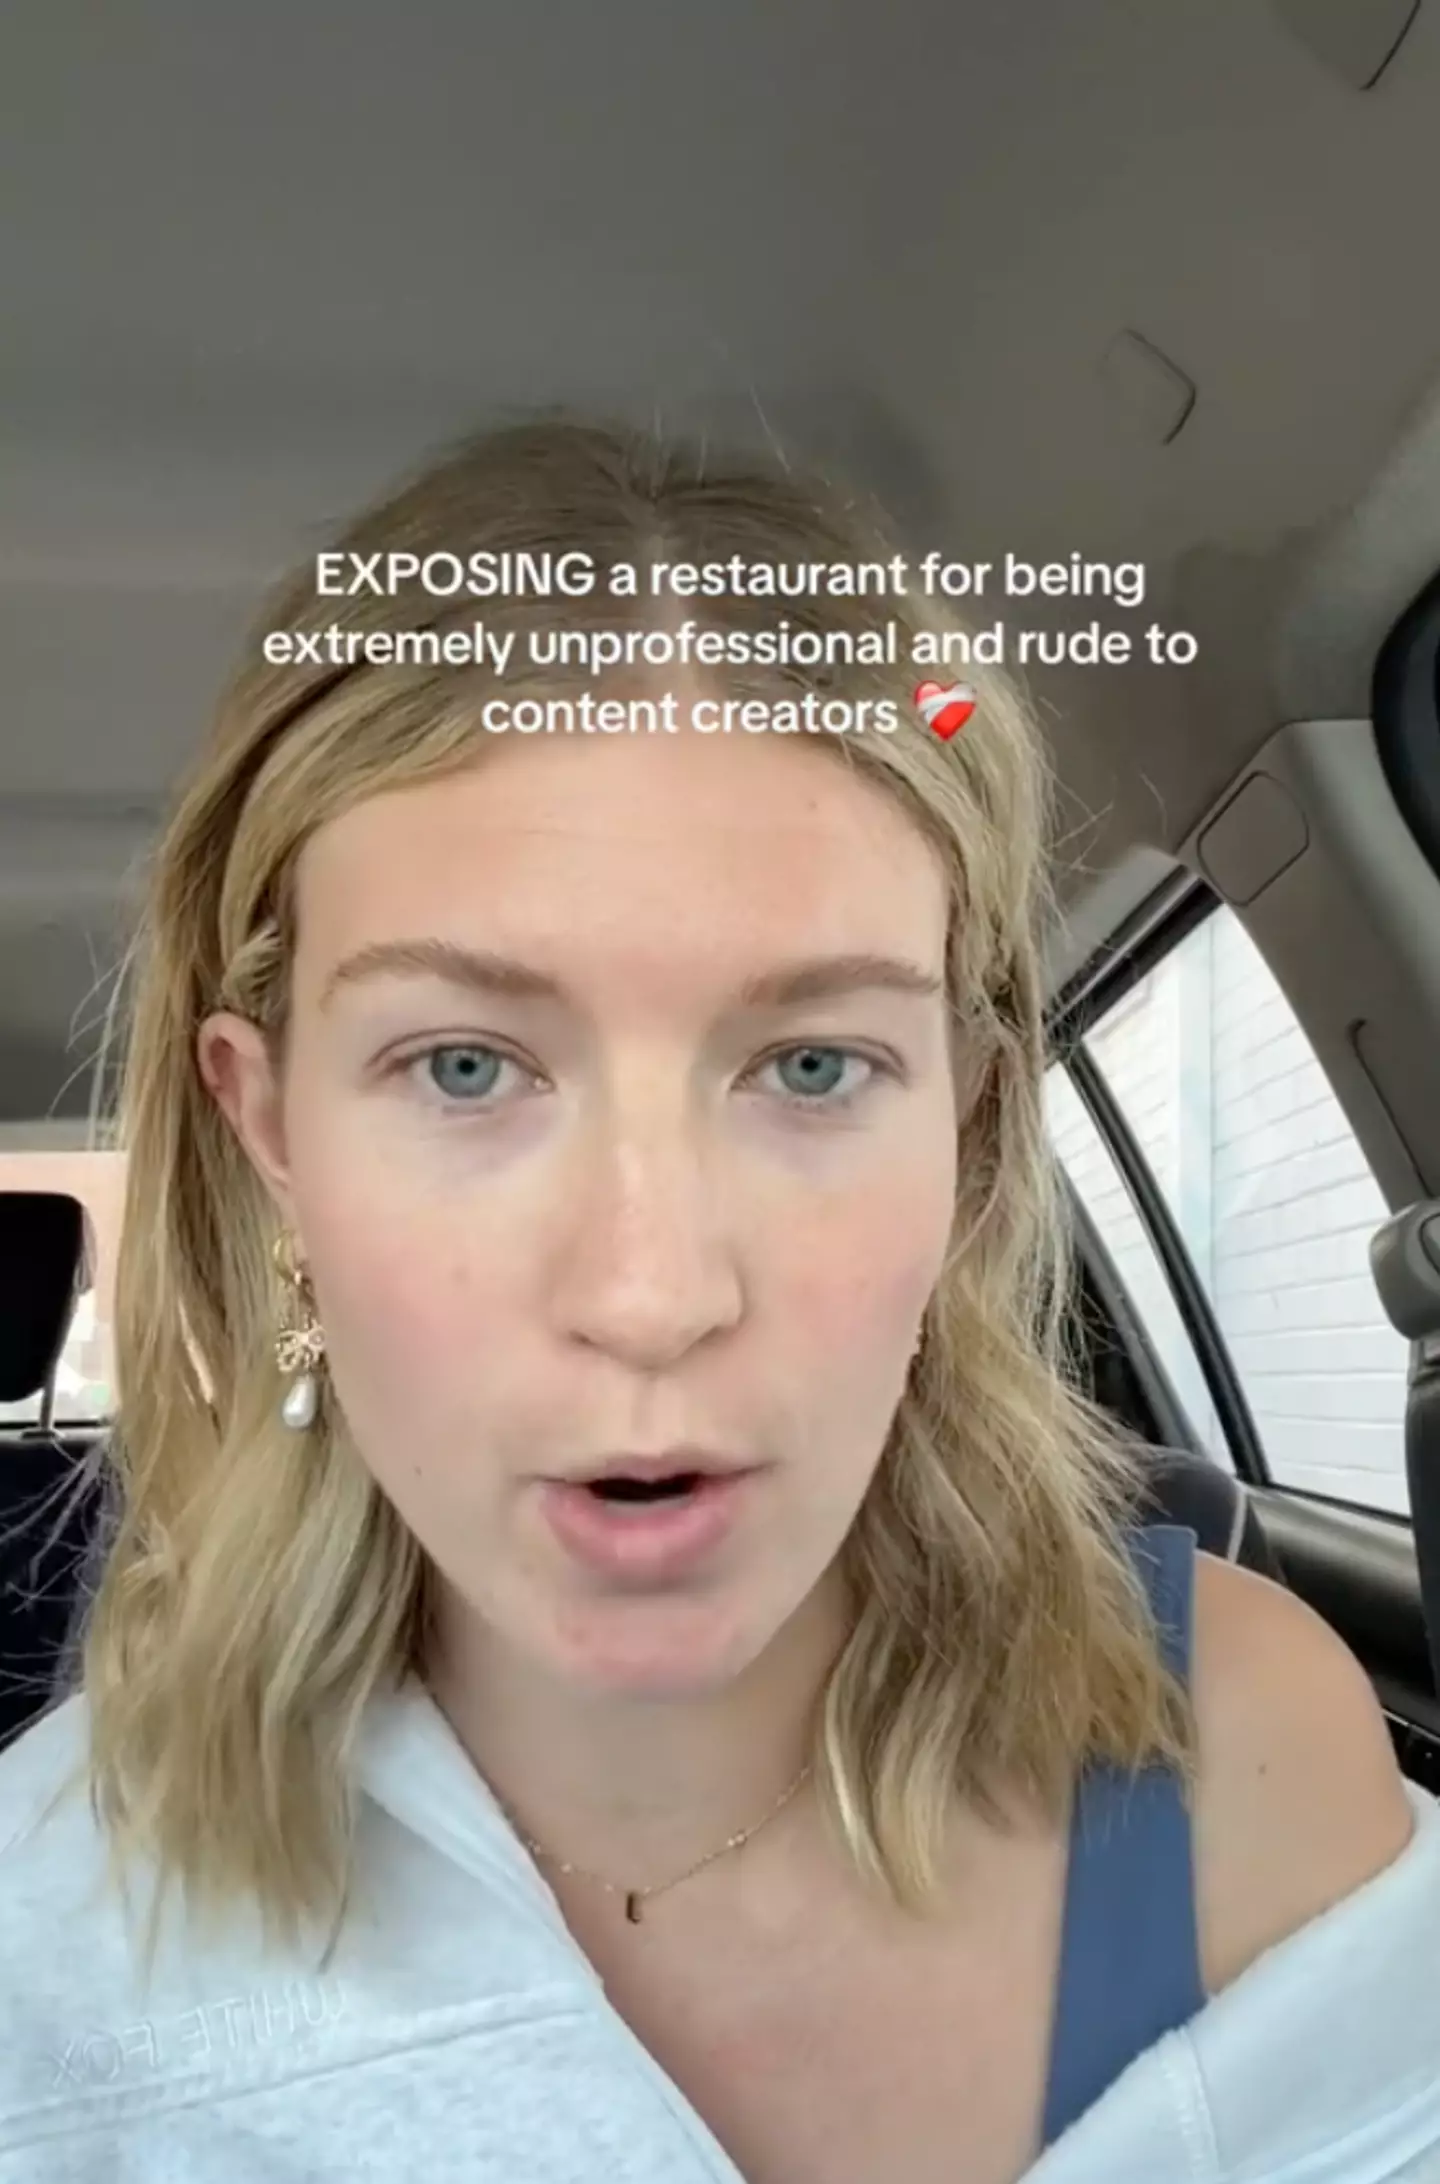 Last month she uploaded a video attempting to expose a restaurant that denied a collaboration with her. (jamiesonmayyy/TikTok)